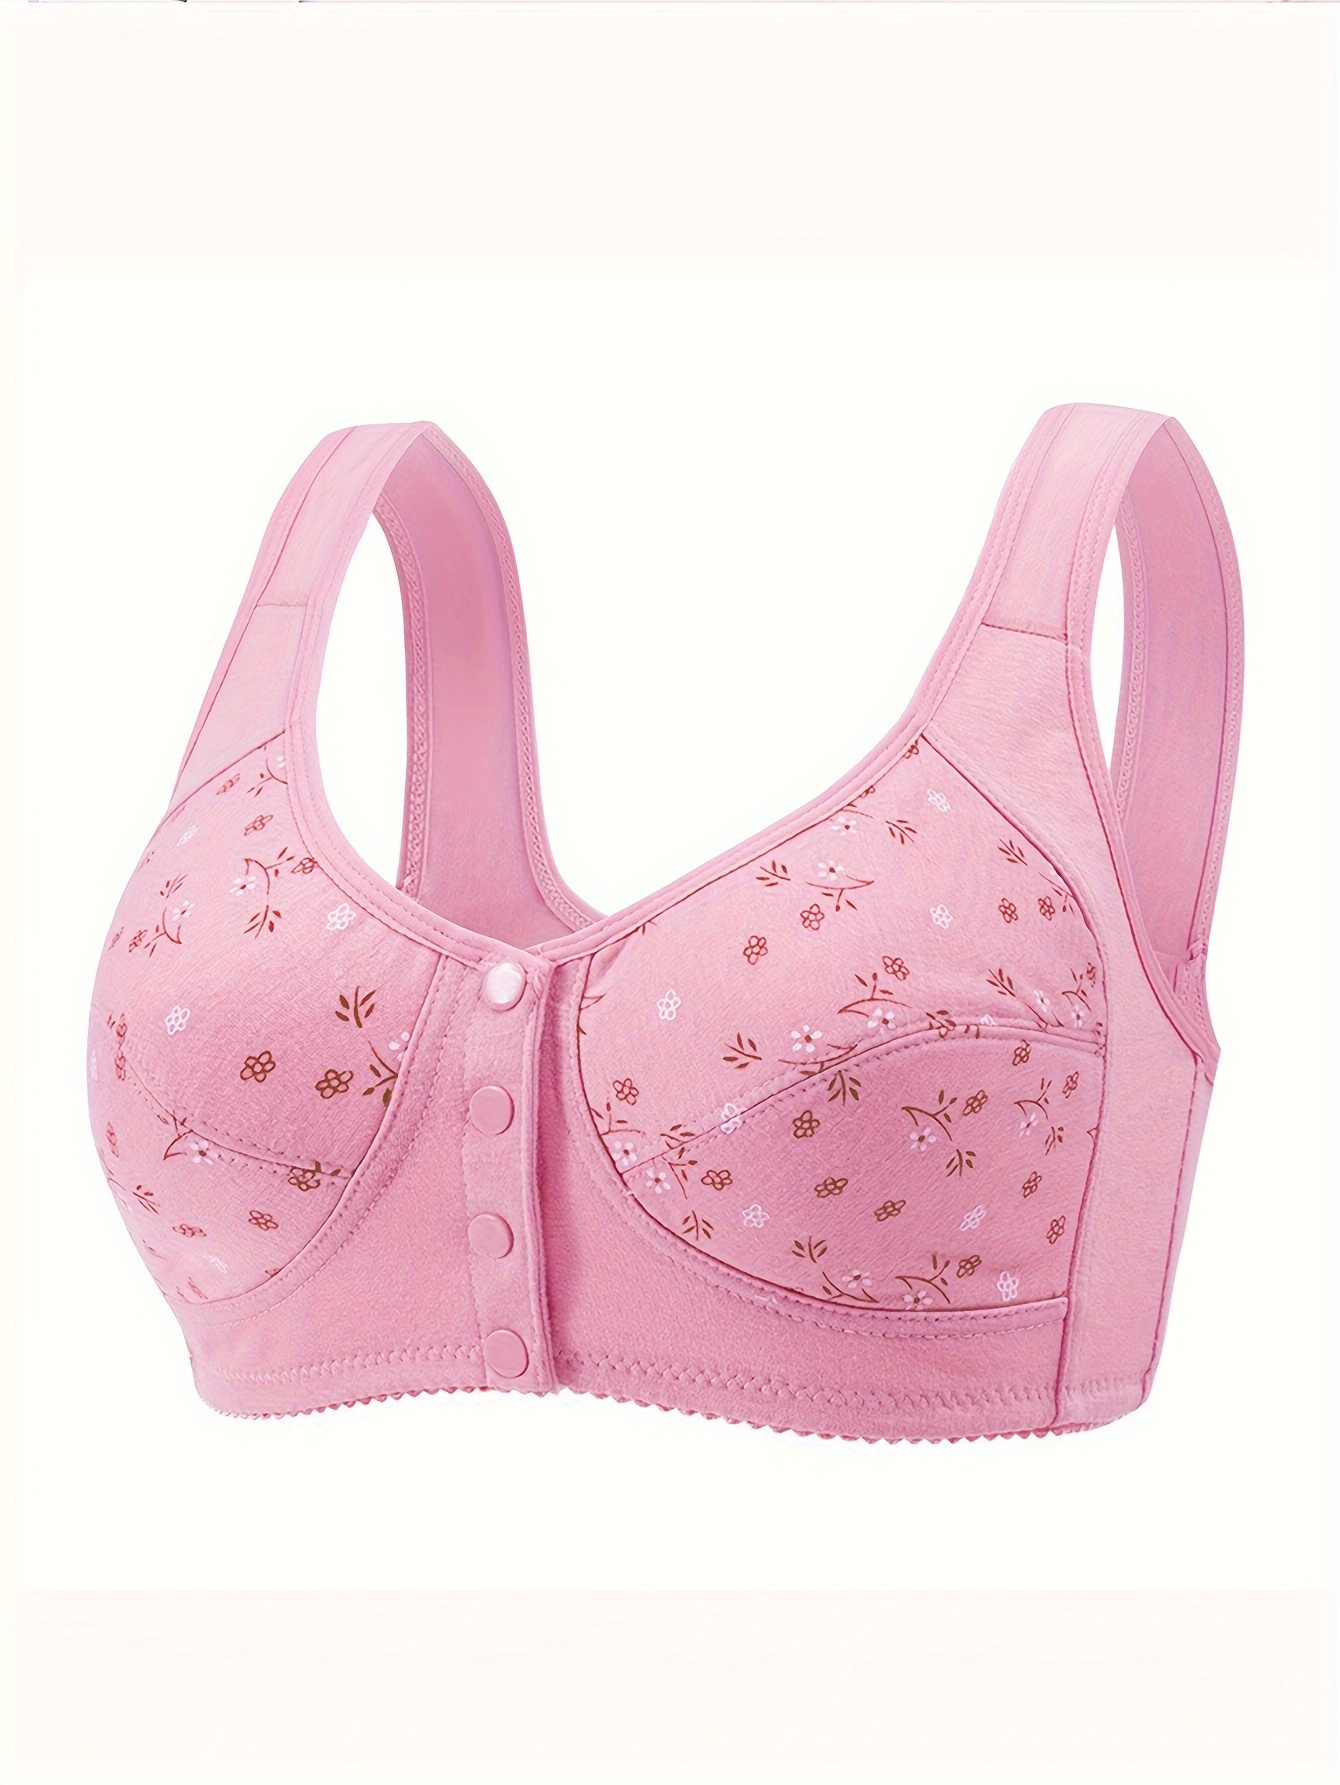 FREE - CHECK DESCRIPTION!! pink floral 34A bra Size undefined - $4 - From  megan